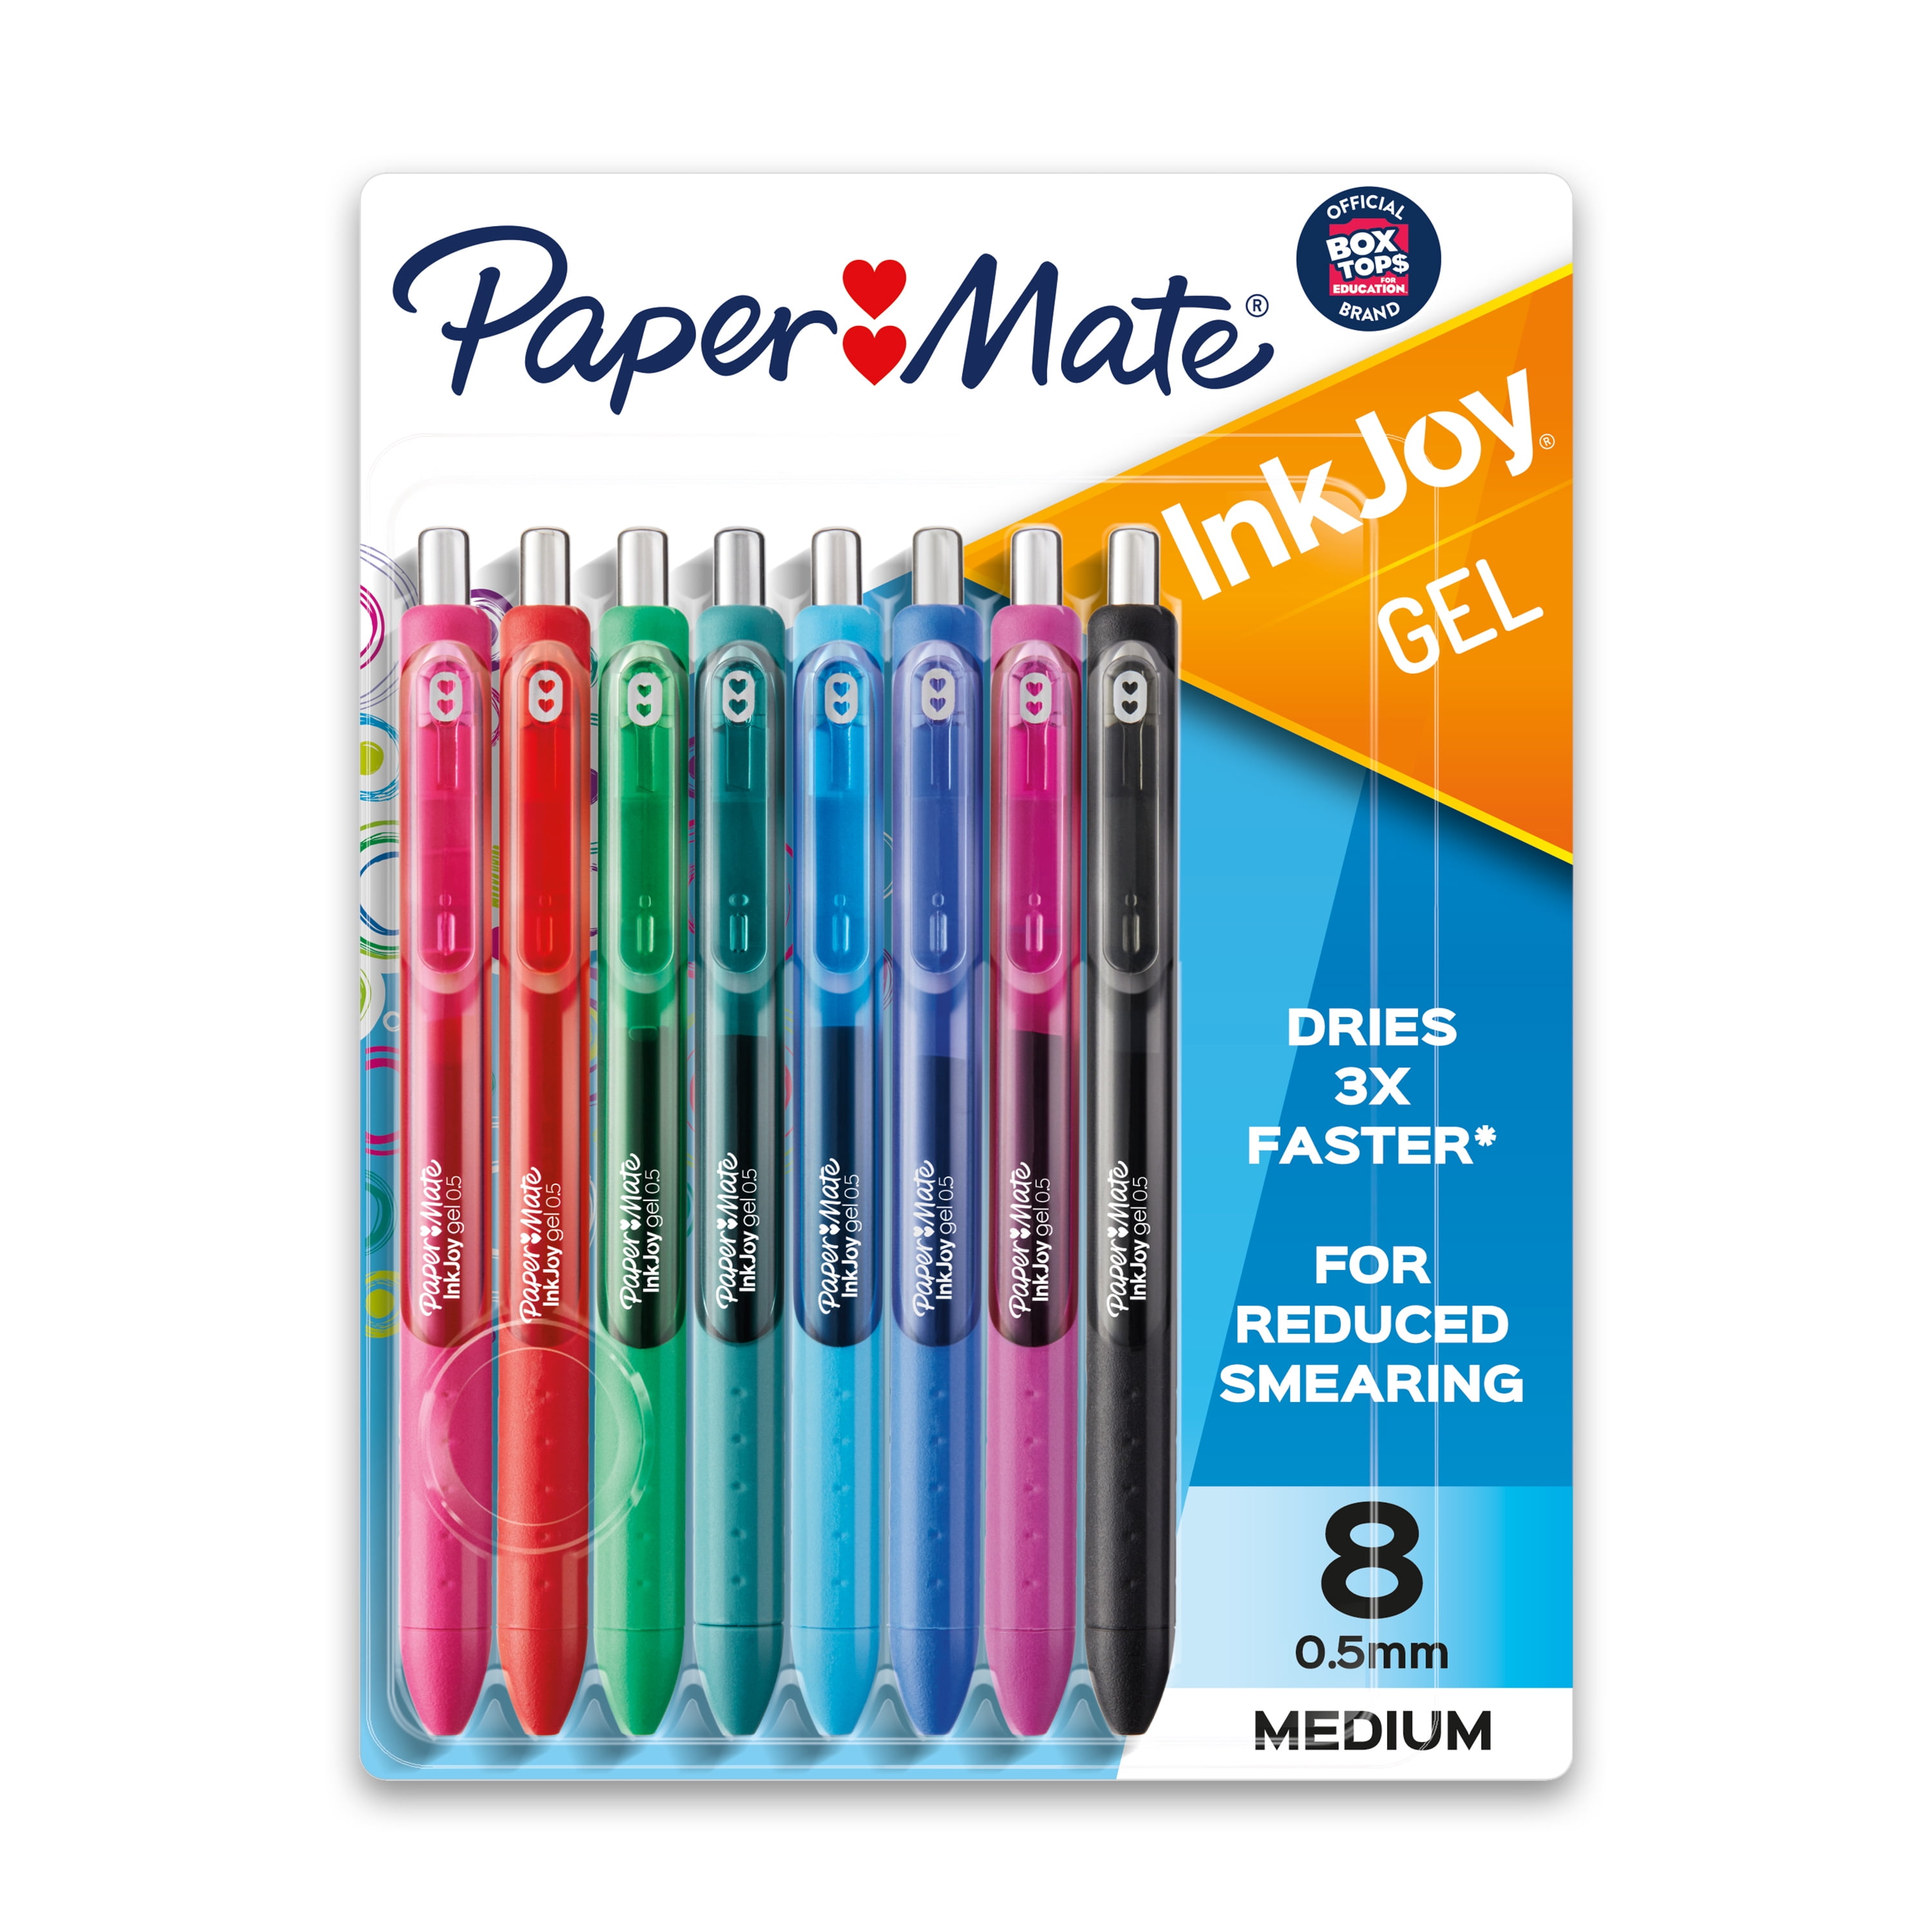 The Best Pen Choice for EXAMS + Best Gel Pens Recommendation